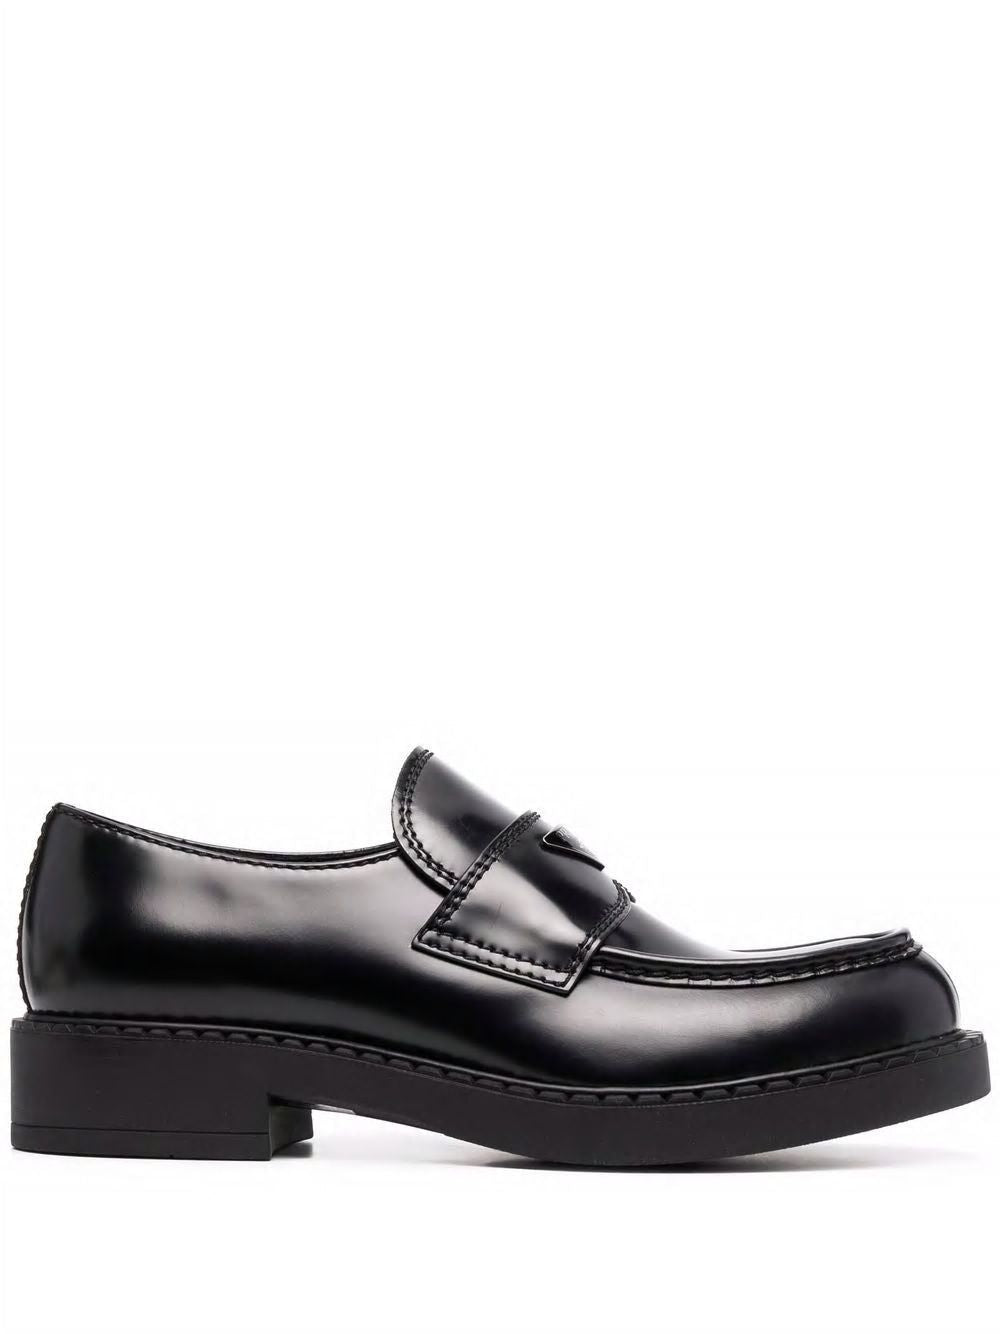 LOGO PLAQUE LEATHER LOAFERS